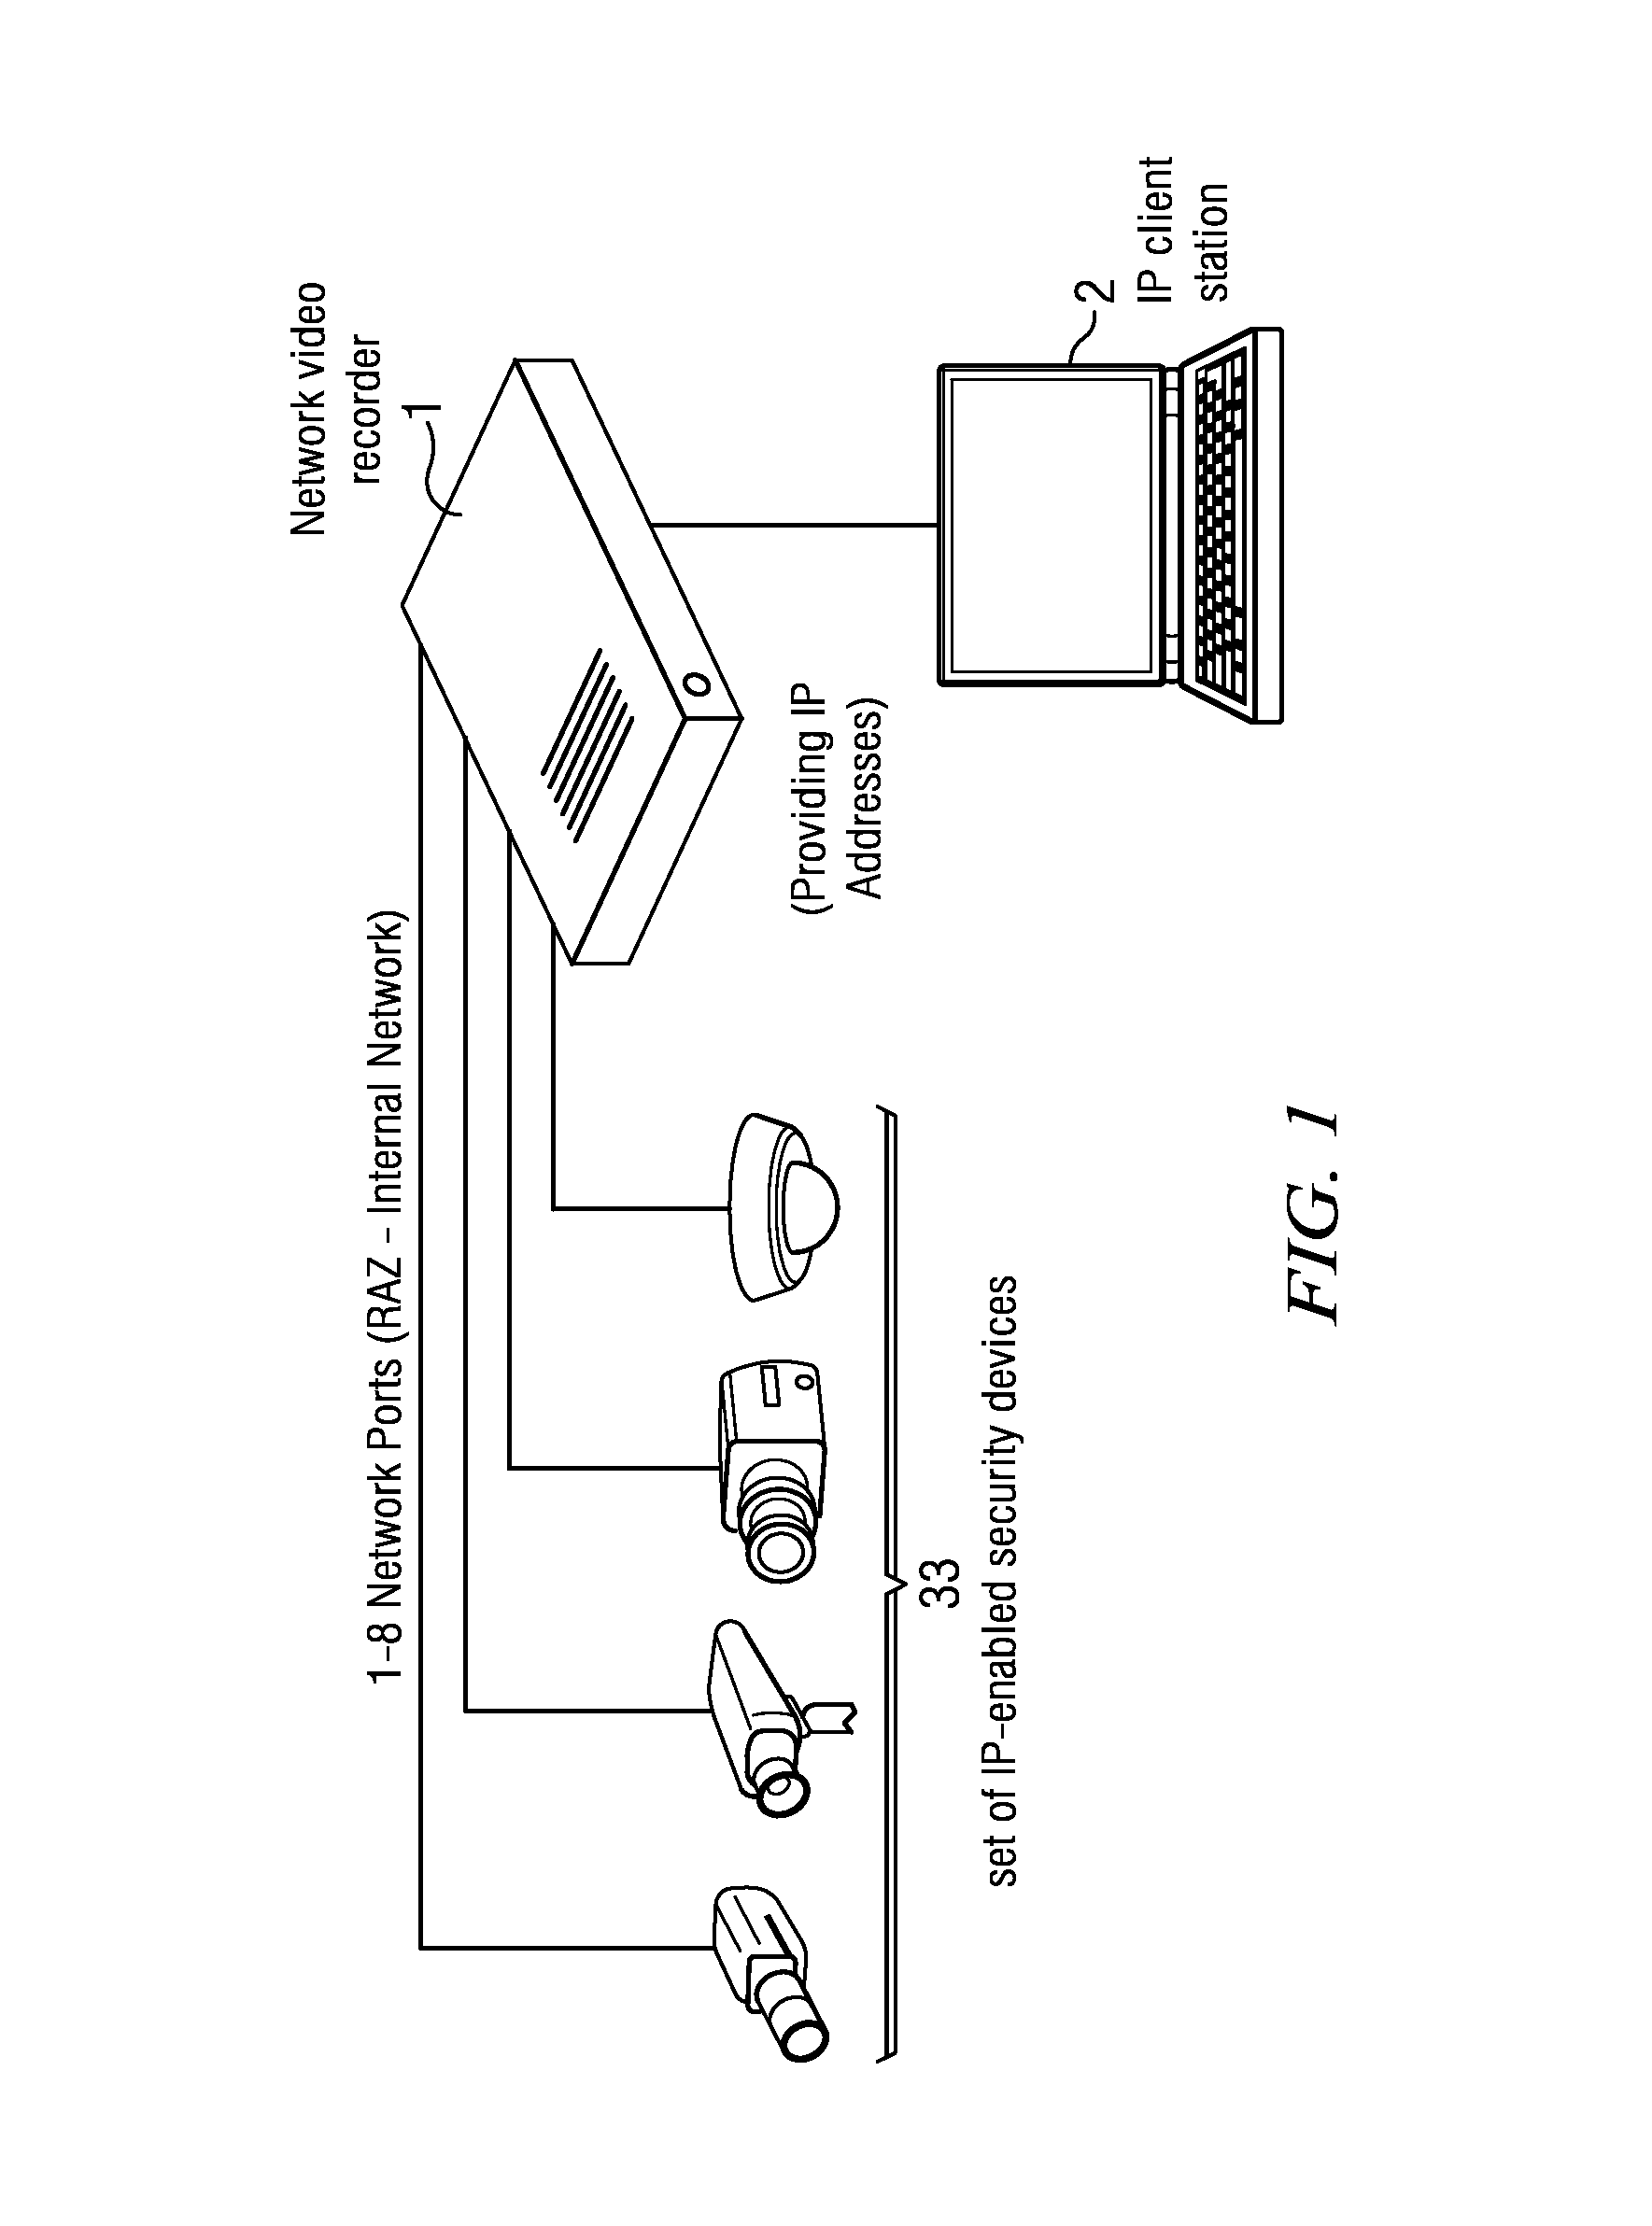 Network video recorder system